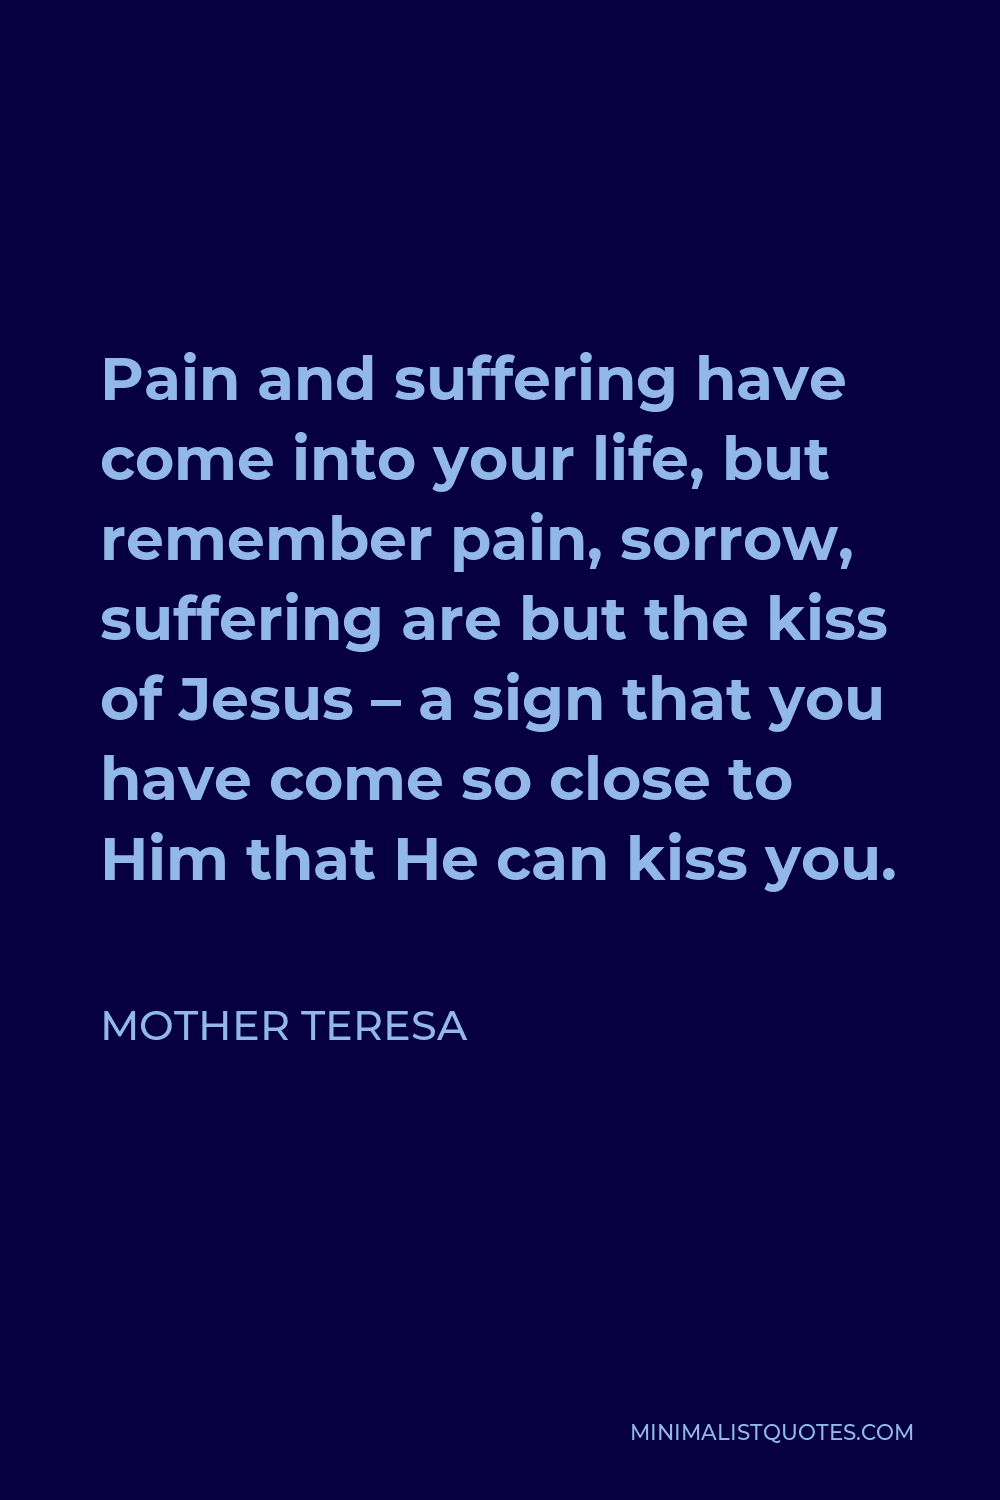 Mother Teresa Quote - Pain and suffering have come into your life, but remember pain, sorrow, suffering are but the kiss of Jesus – a sign that you have come so close to Him that He can kiss you.